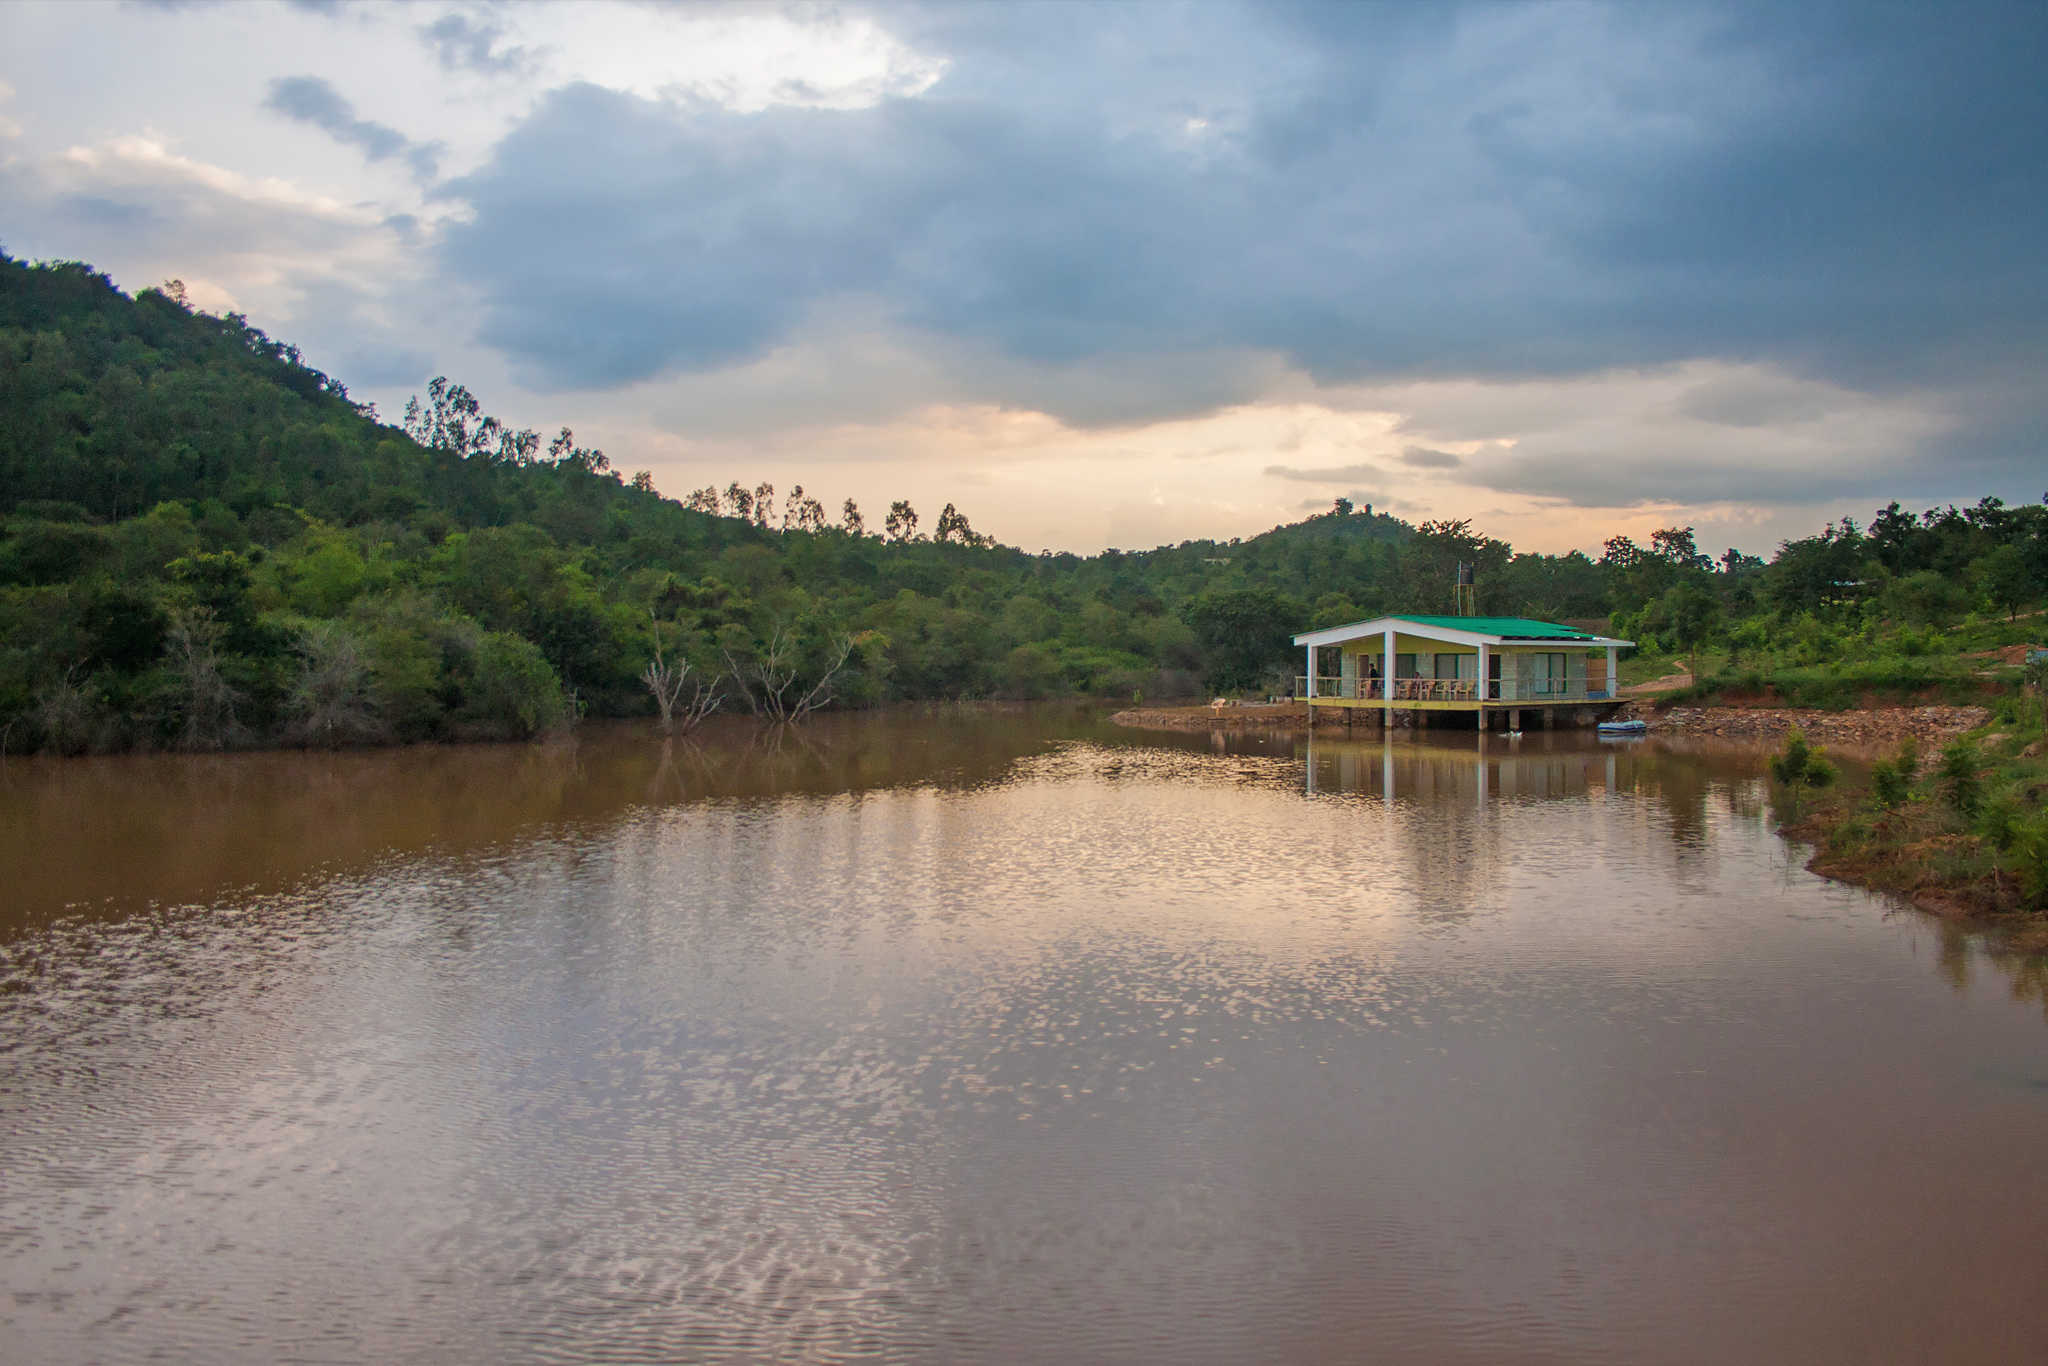 The Outback Farm and Homestay surrounded by nature, forests and a beautiful lake